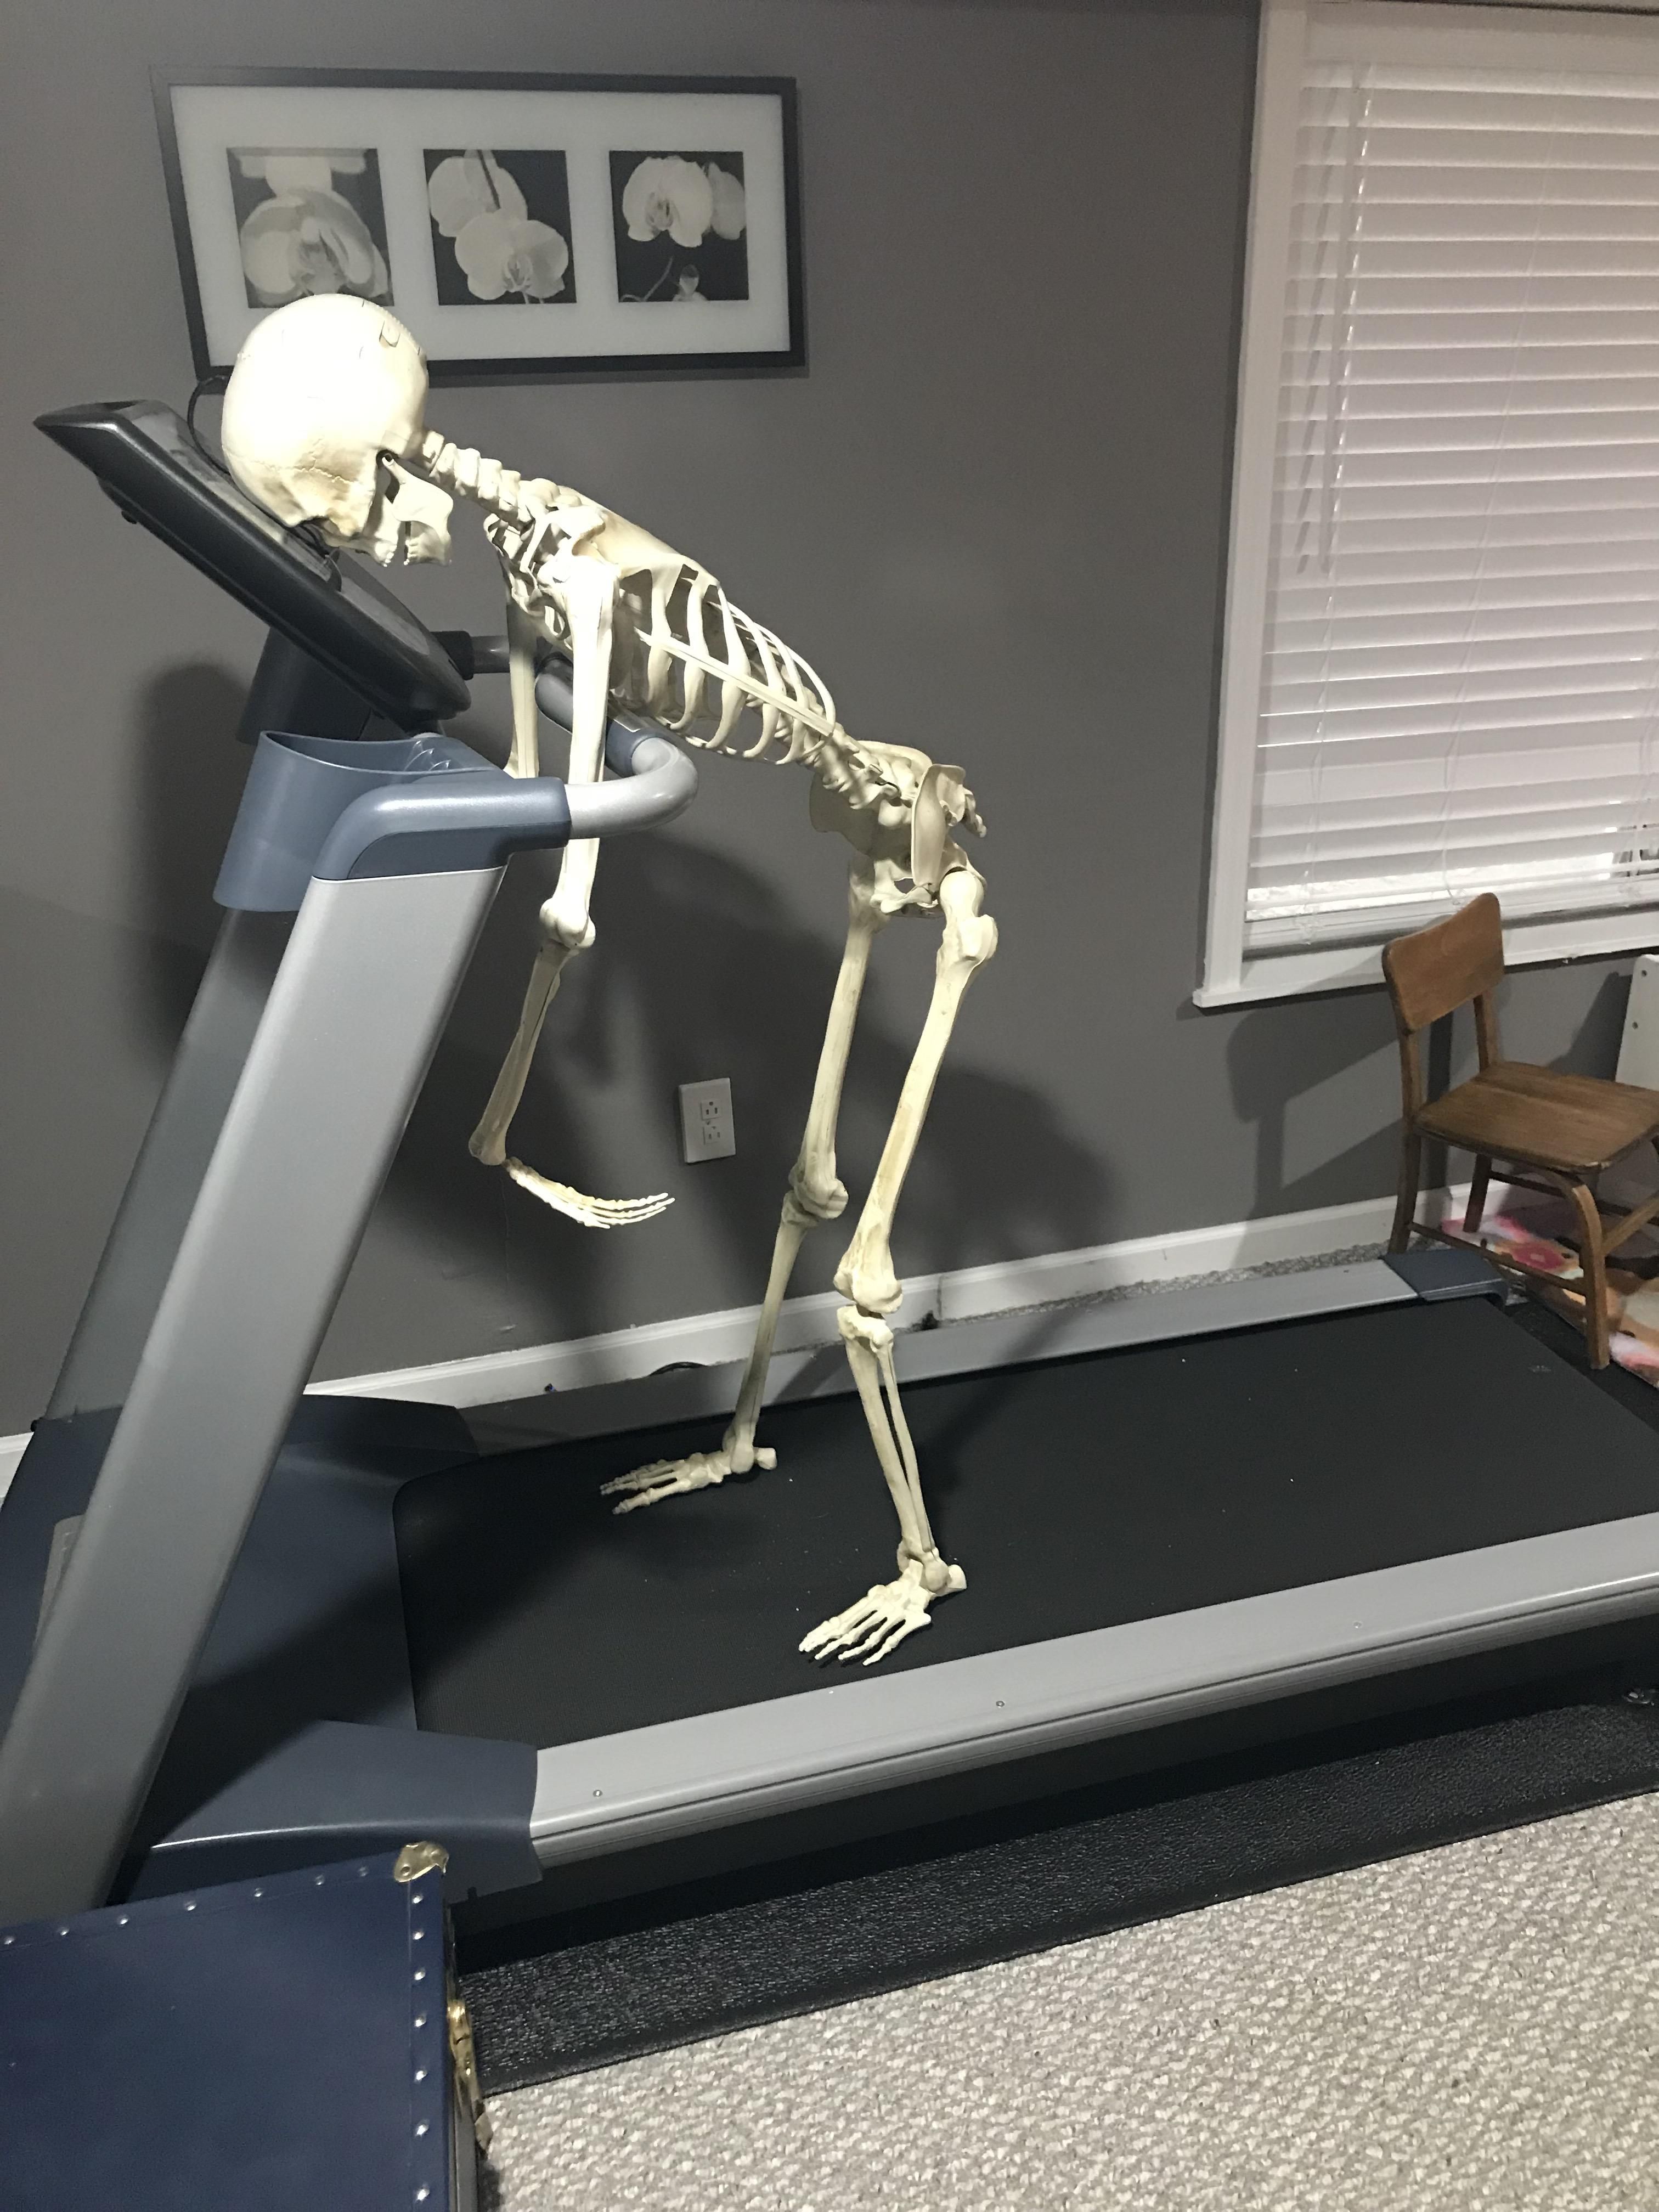 Me, waiting for the energy to work out.